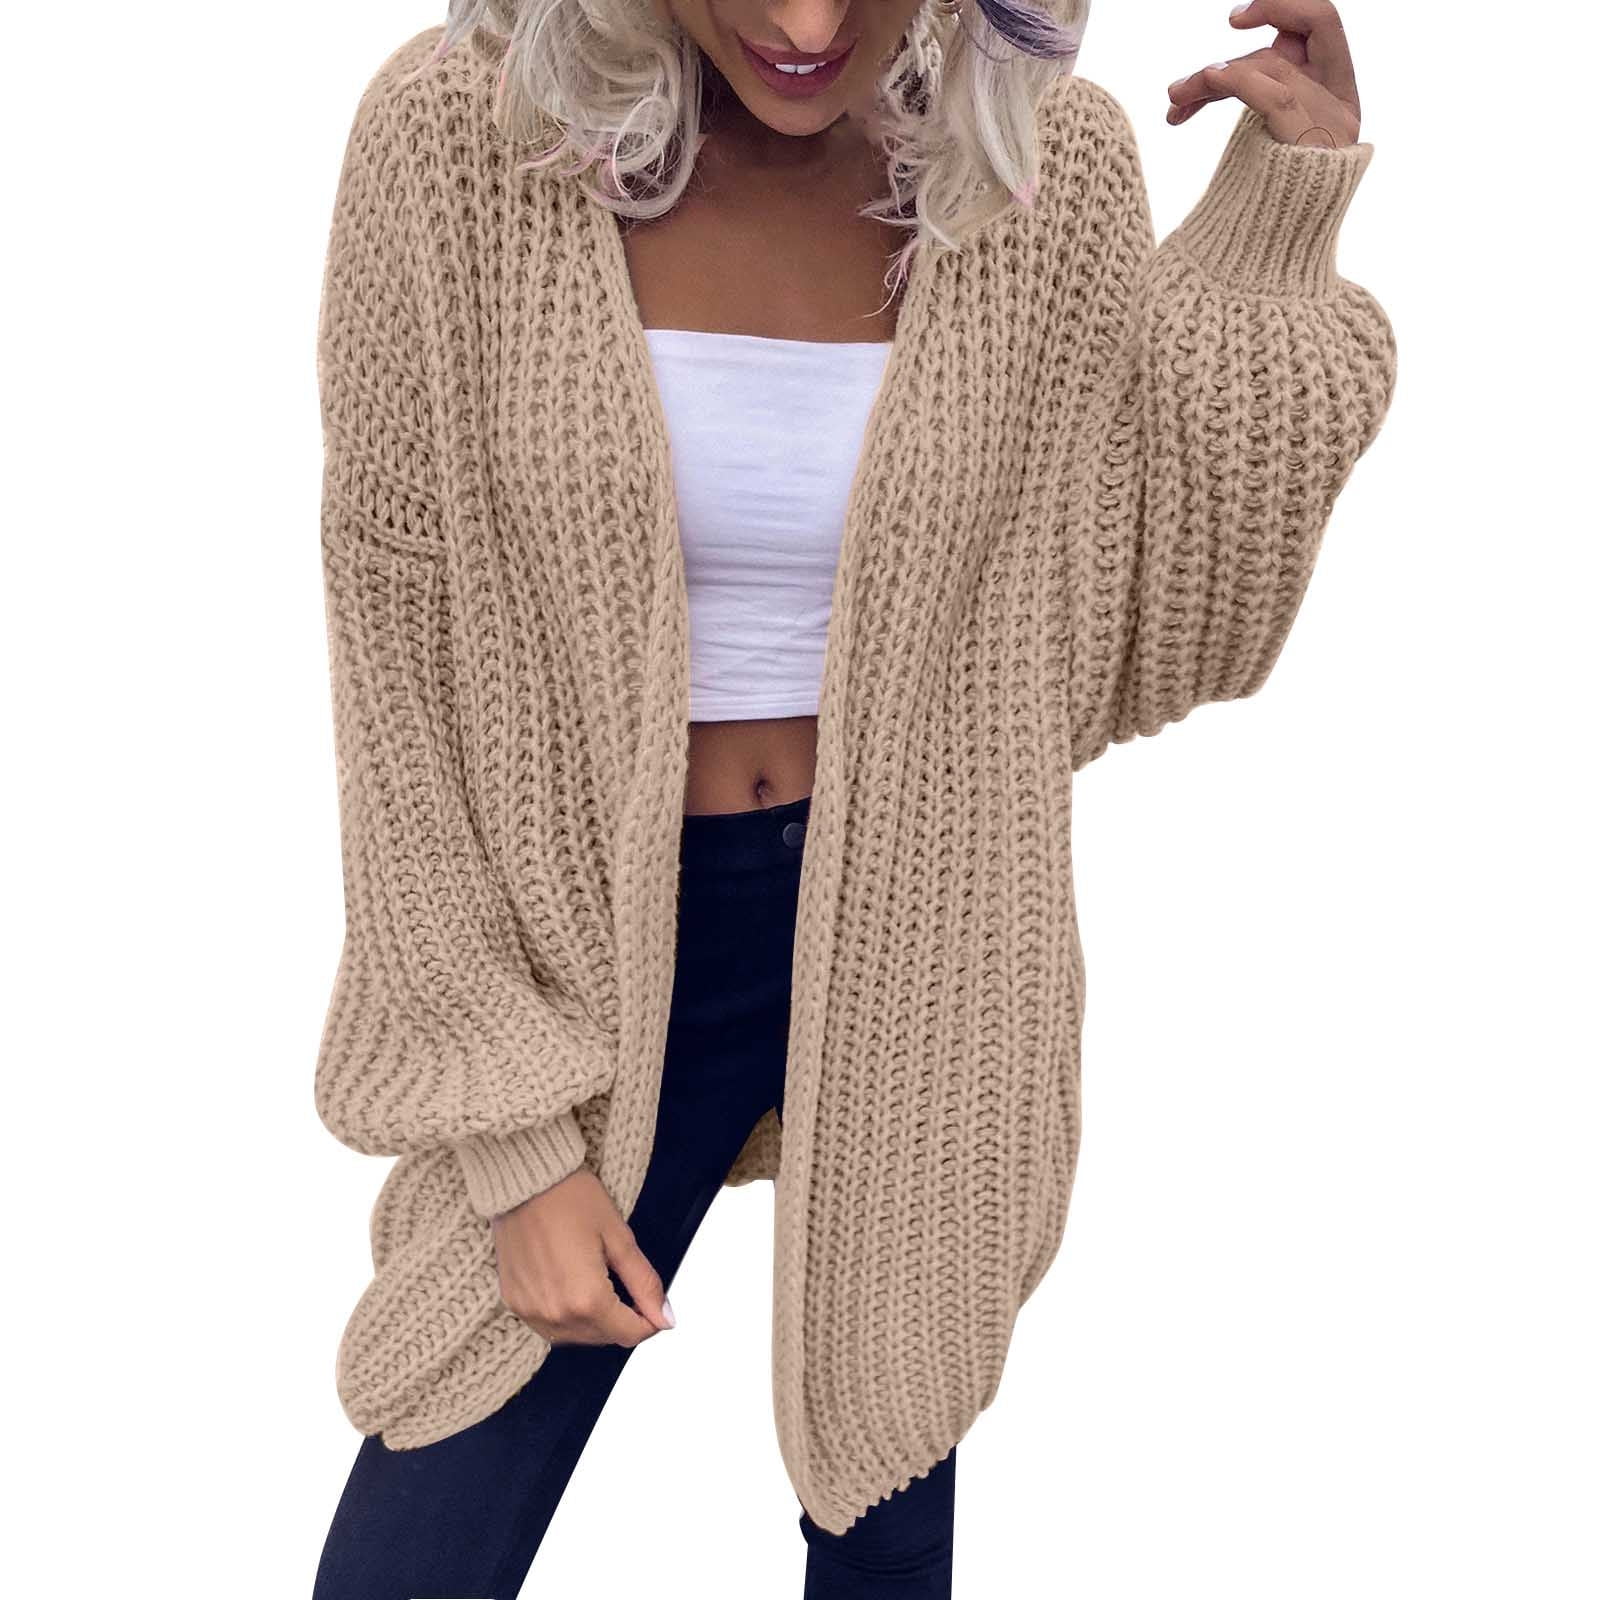 Oatmeal Beige Long Knitted Cardigan With Hood, Oversized Soft and Cozy  Loose Weave Sweater 